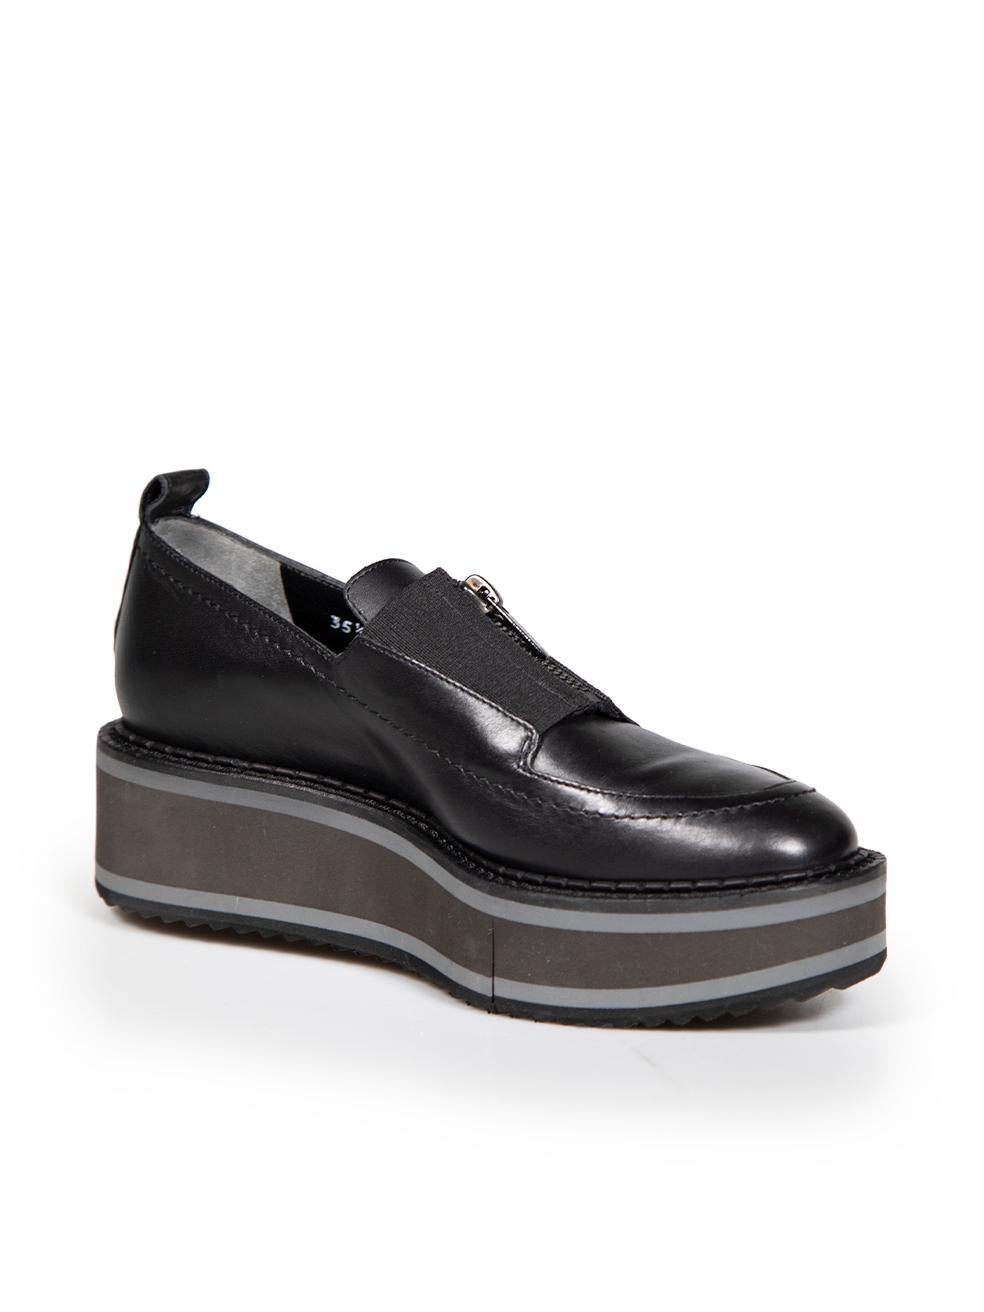 CONDITION is Never worn. No visible wear to shoes is evident on this new Clergerie designer resale item. Please note that the cut in the platform is deliberate.
 
 
 
 Details
 
 
 Black
 
 Leather
 
 Loafers
 
 Platform
 
 Round toe
 
 Front zip